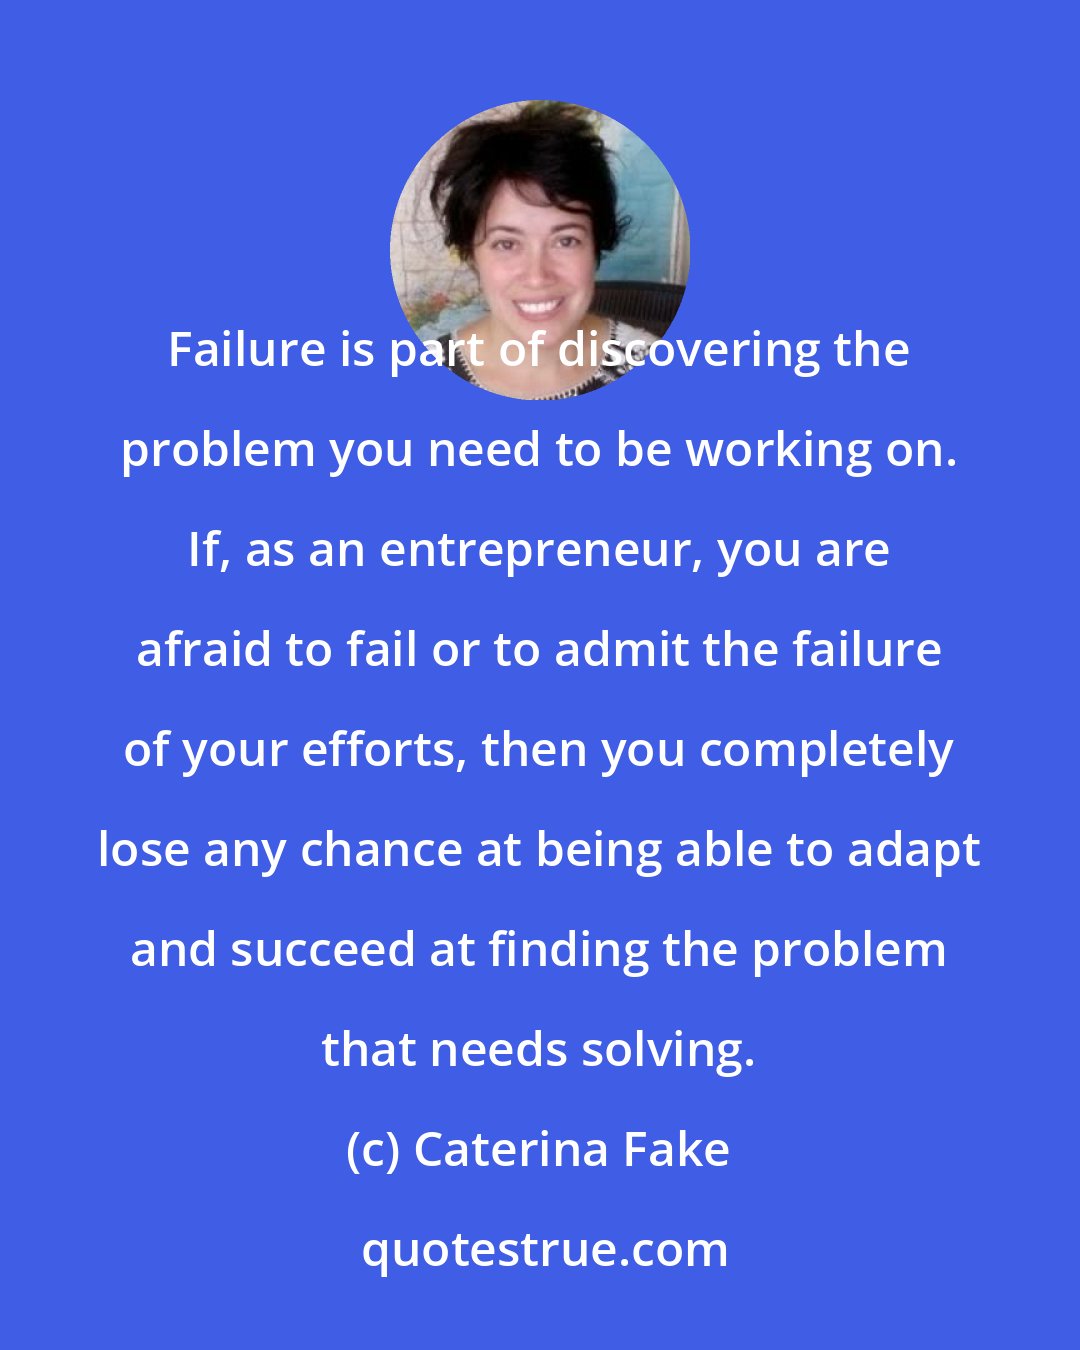 Caterina Fake: Failure is part of discovering the problem you need to be working on. If, as an entrepreneur, you are afraid to fail or to admit the failure of your efforts, then you completely lose any chance at being able to adapt and succeed at finding the problem that needs solving.